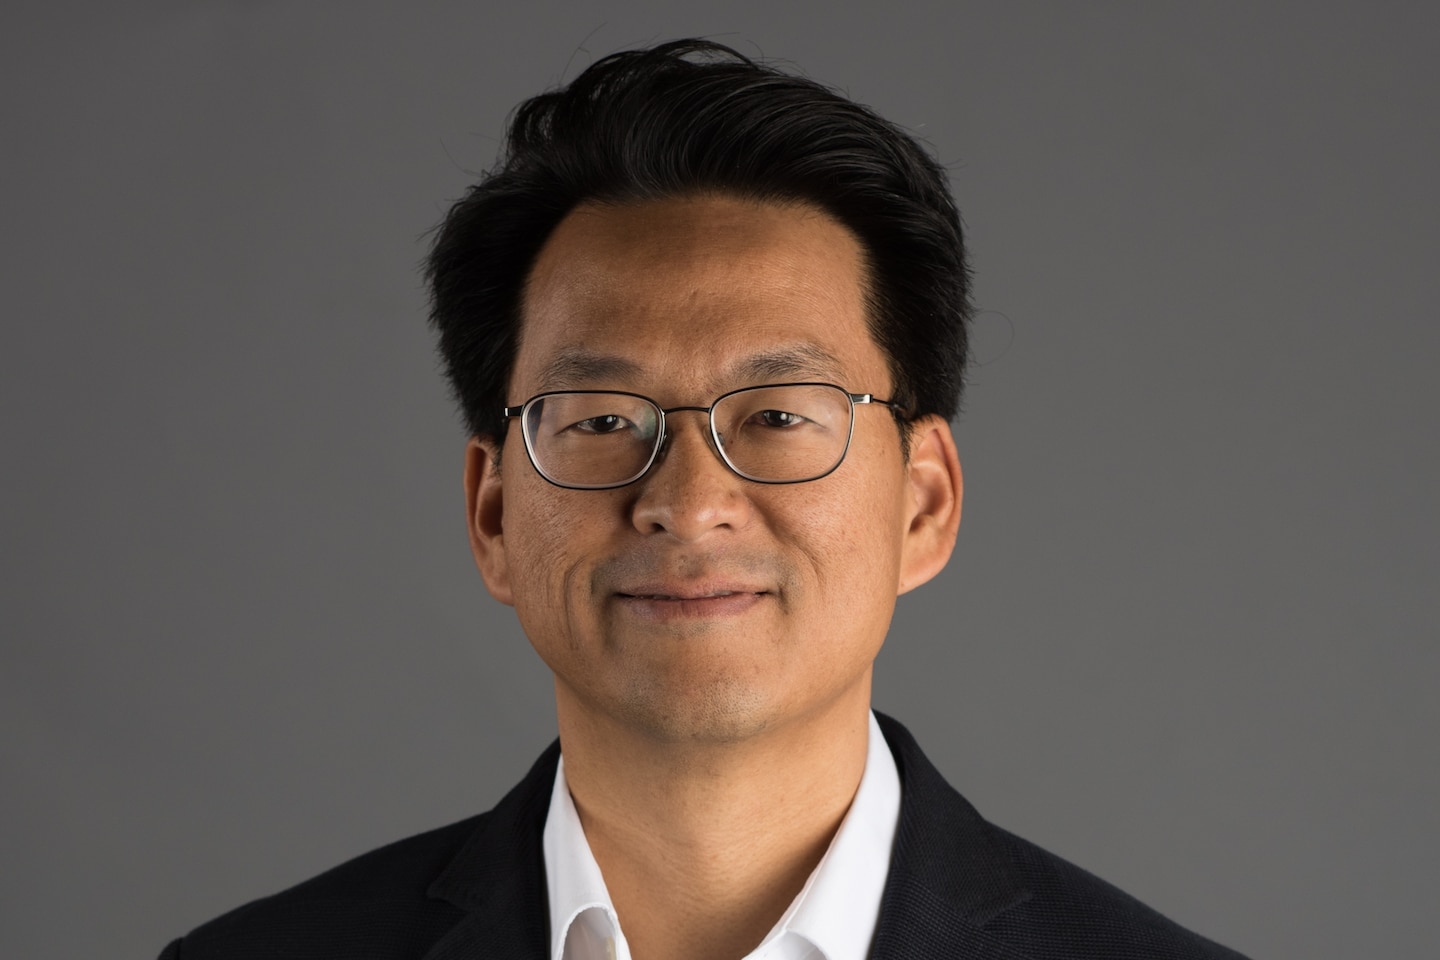 William Wan wins Austen Riggs Erikson Prize for Excellence in Mental Health Media